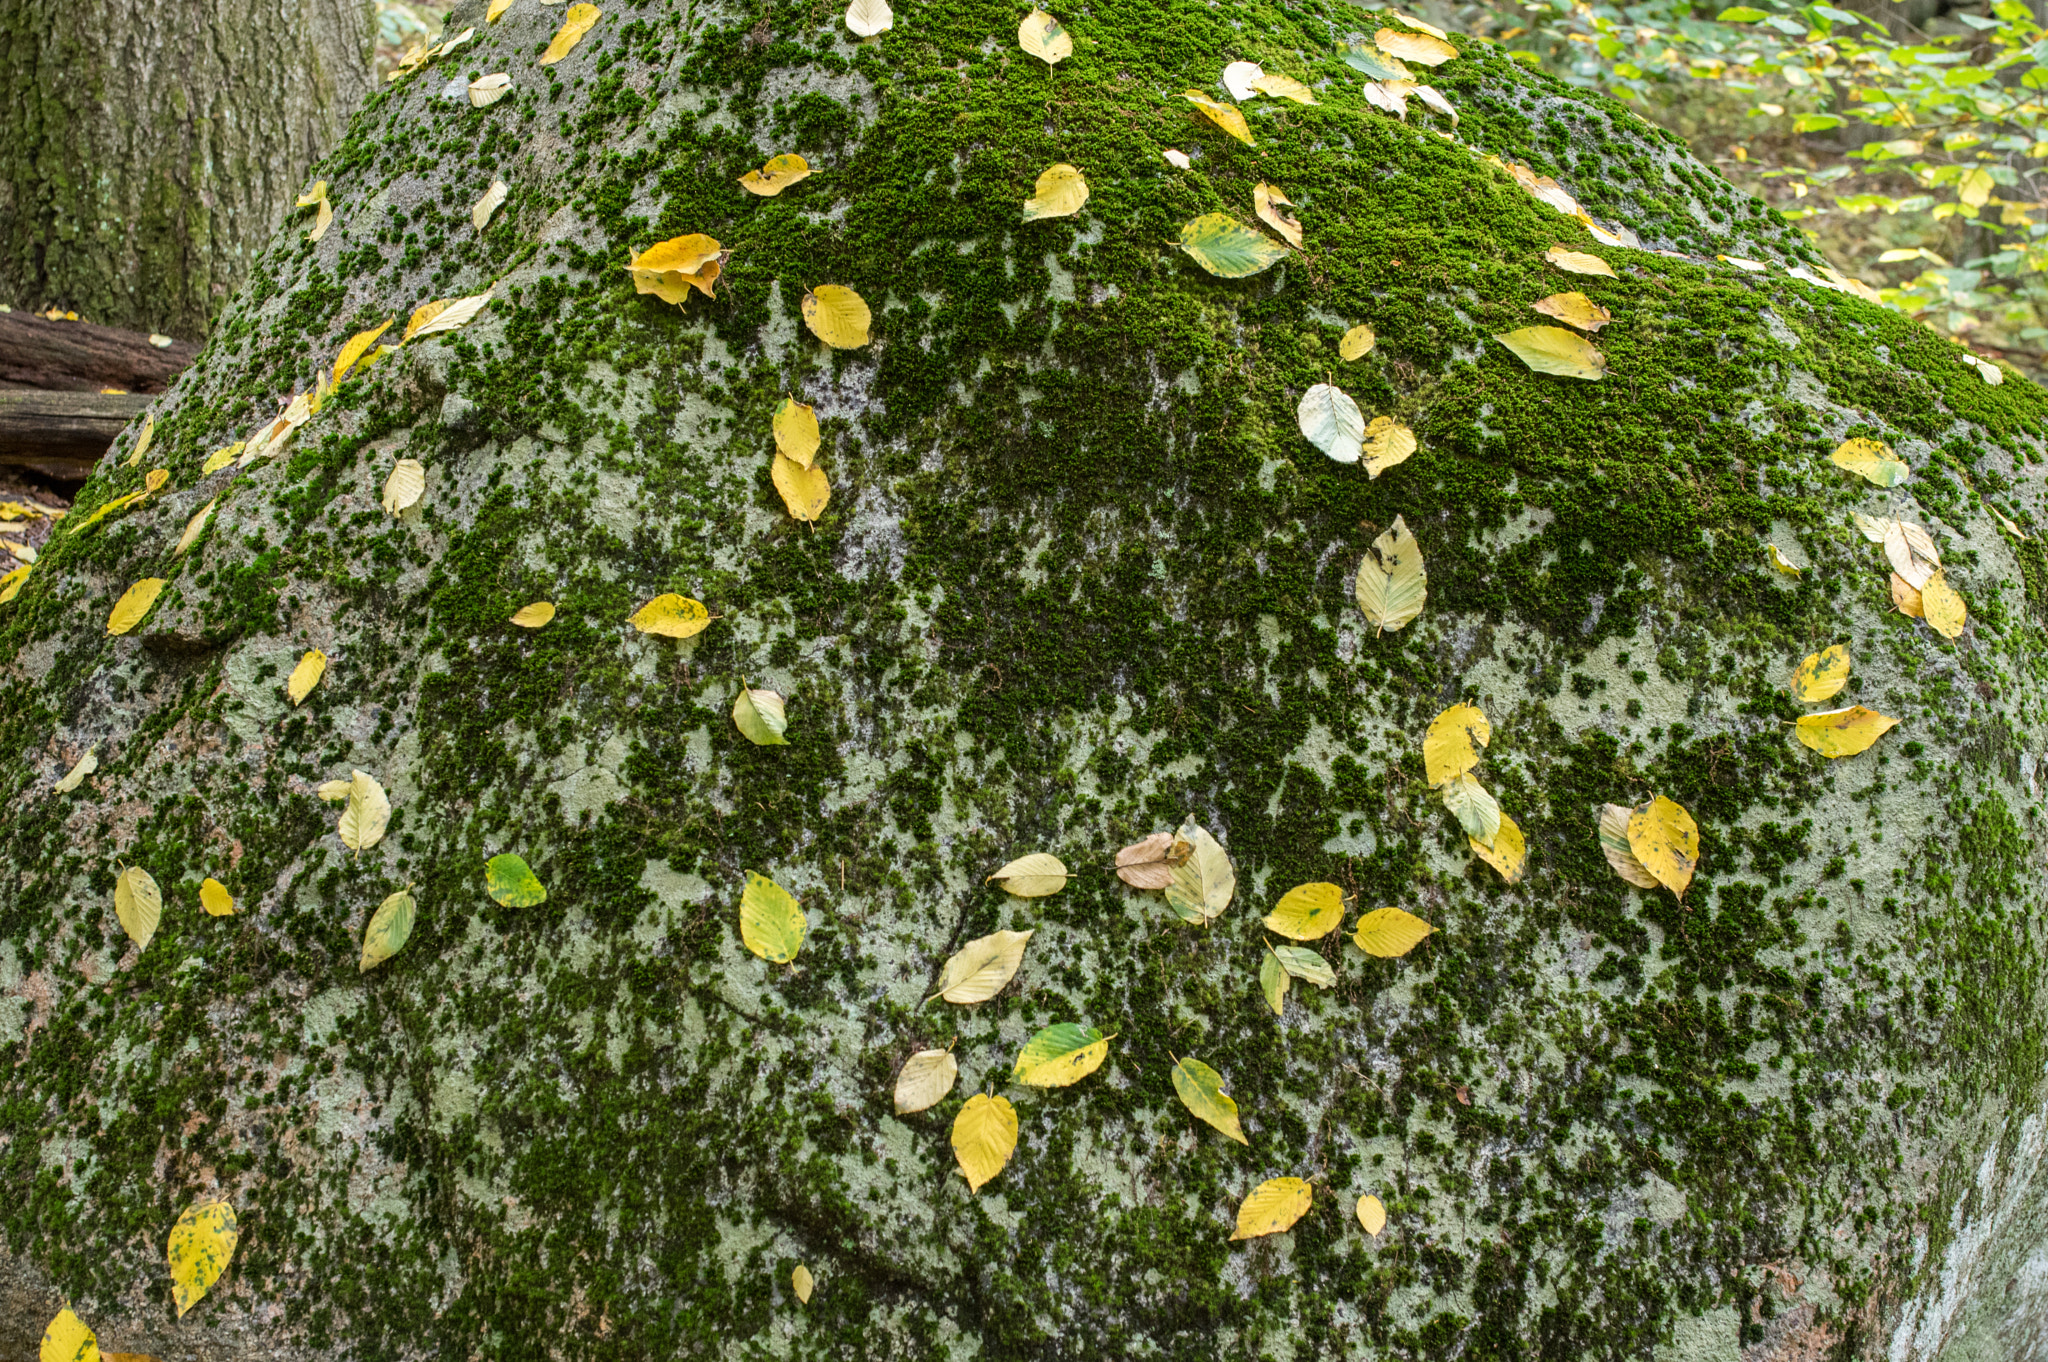 Pentax K-3 + Sigma 35mm F1.4 DG HSM Art sample photo. Leaves on moss covered rock photography